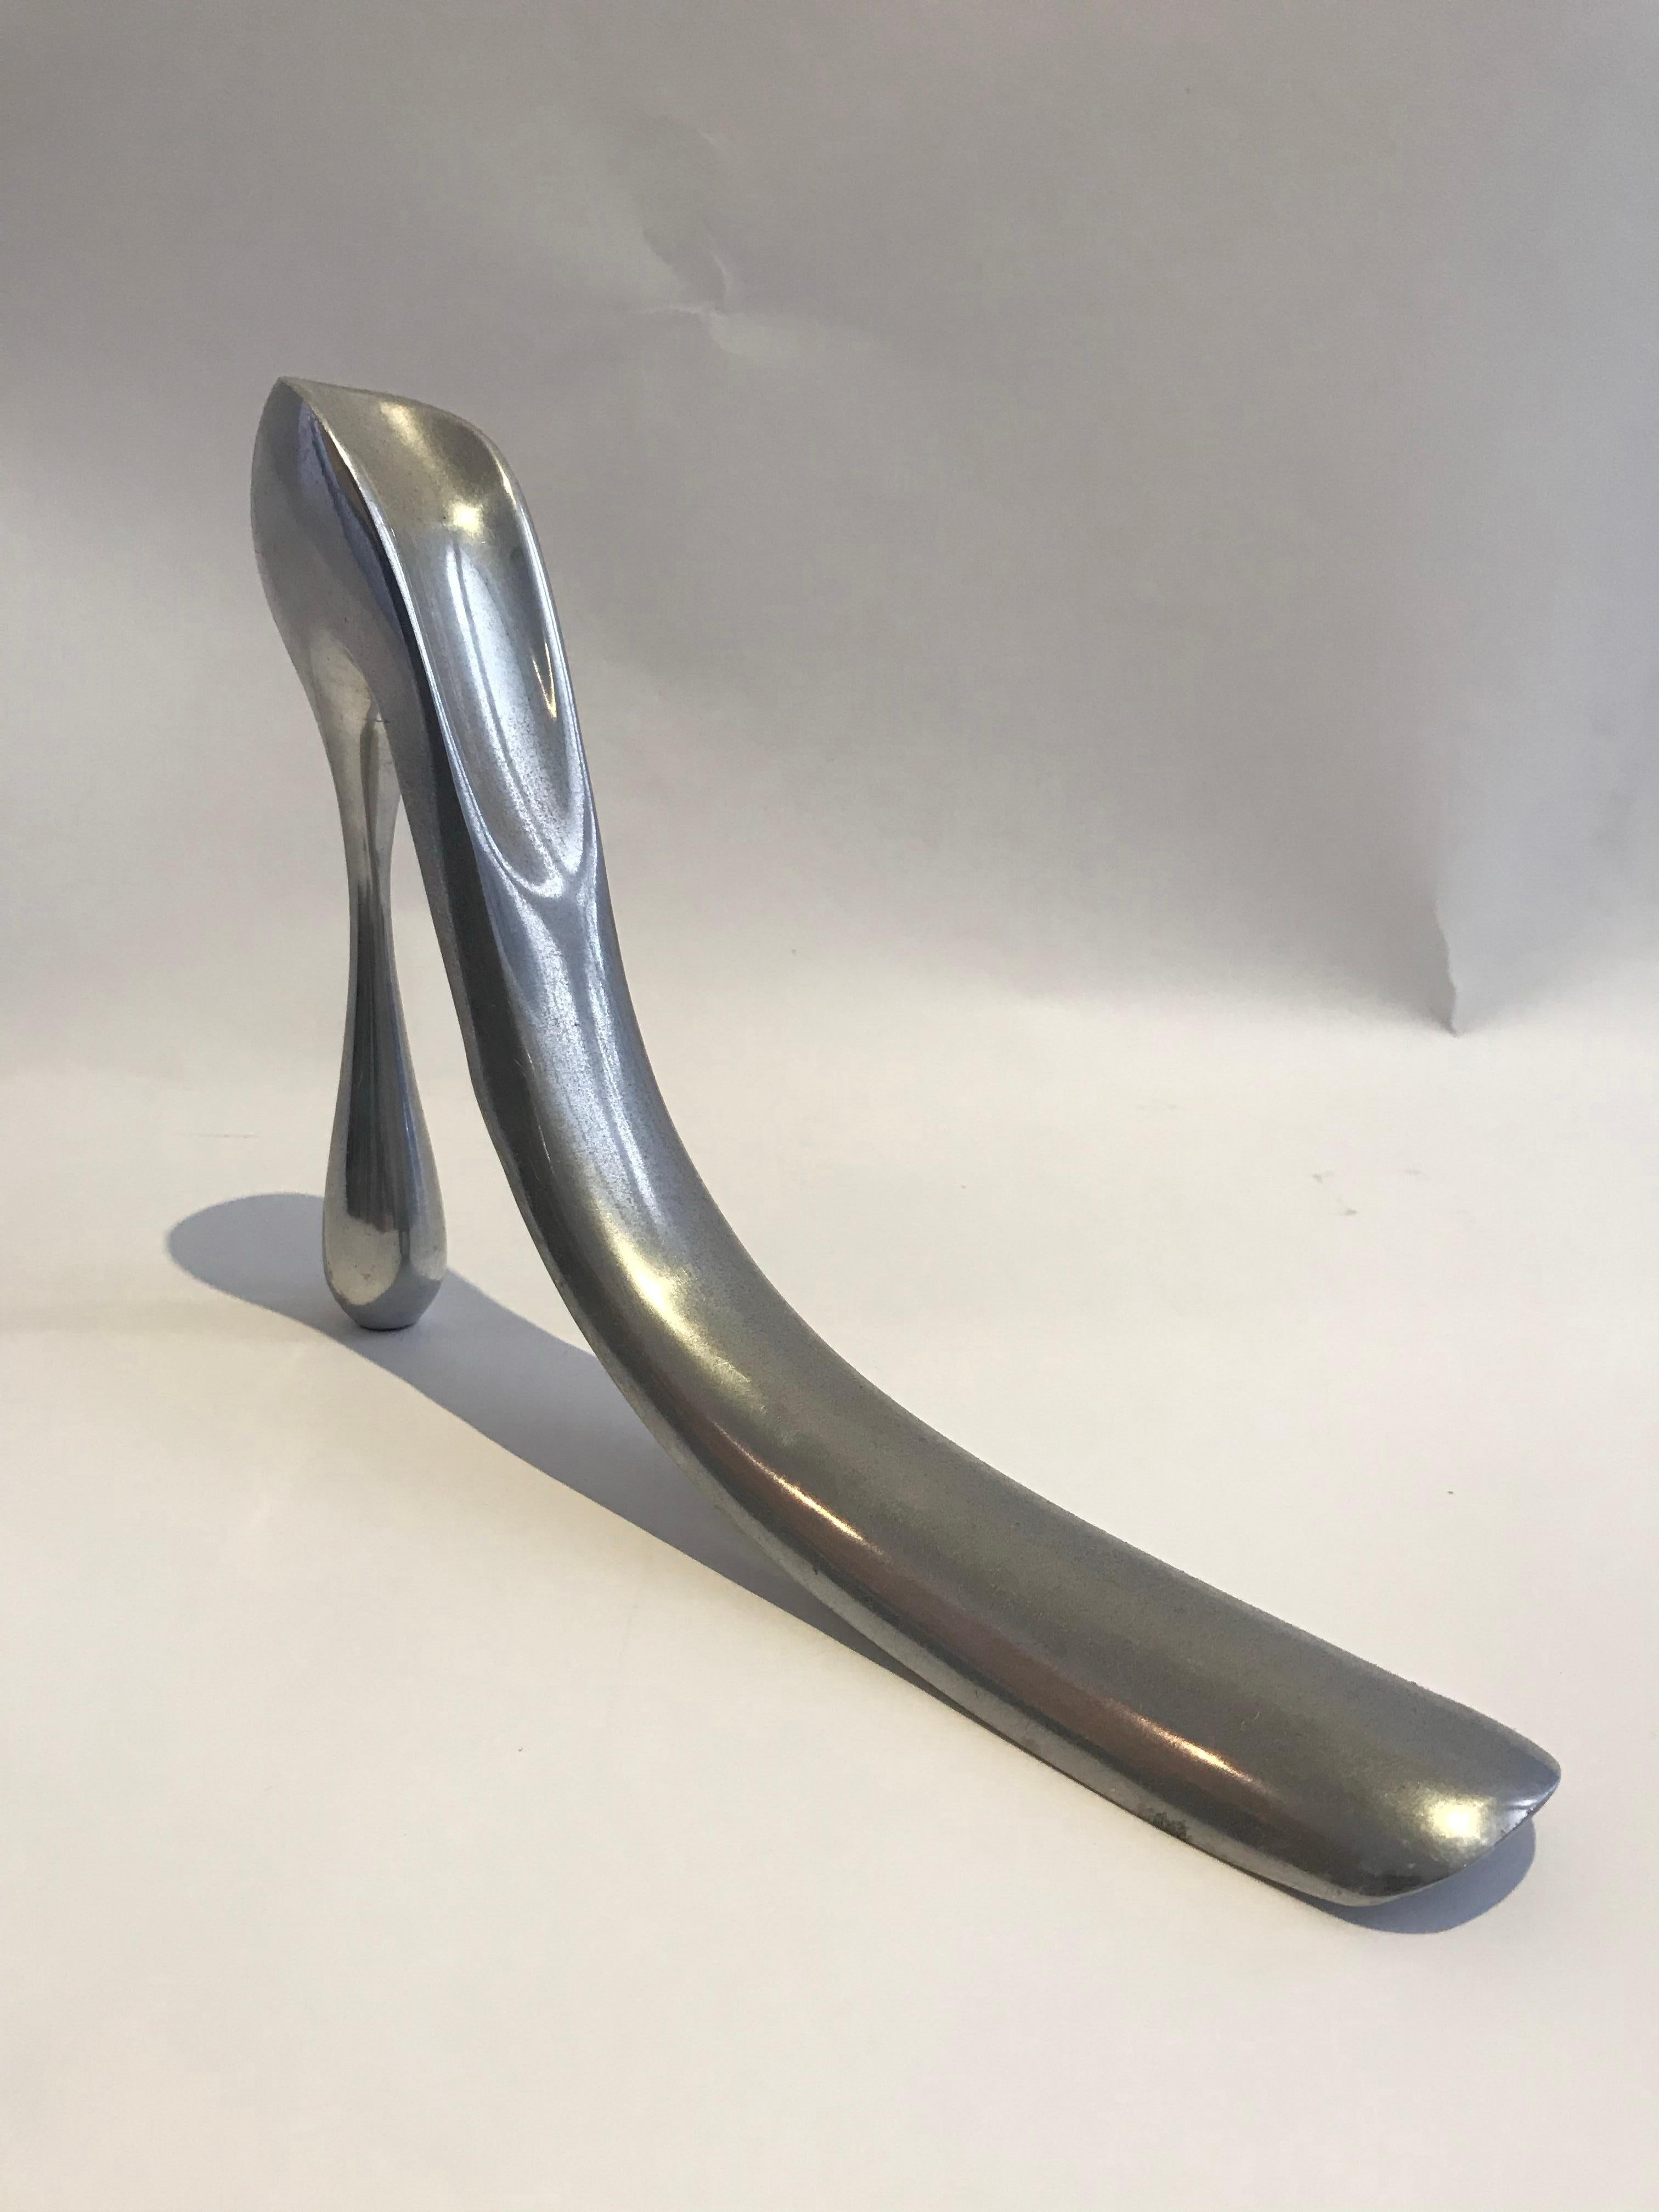 The Manolo shoehorn is a re-creation of Manolo Blahnik for Habitat. Created in 2004, it returns today as a collector's item at Habitat. He likes to recall the pumps of famous shoe designer which responded to the question of their designer: why